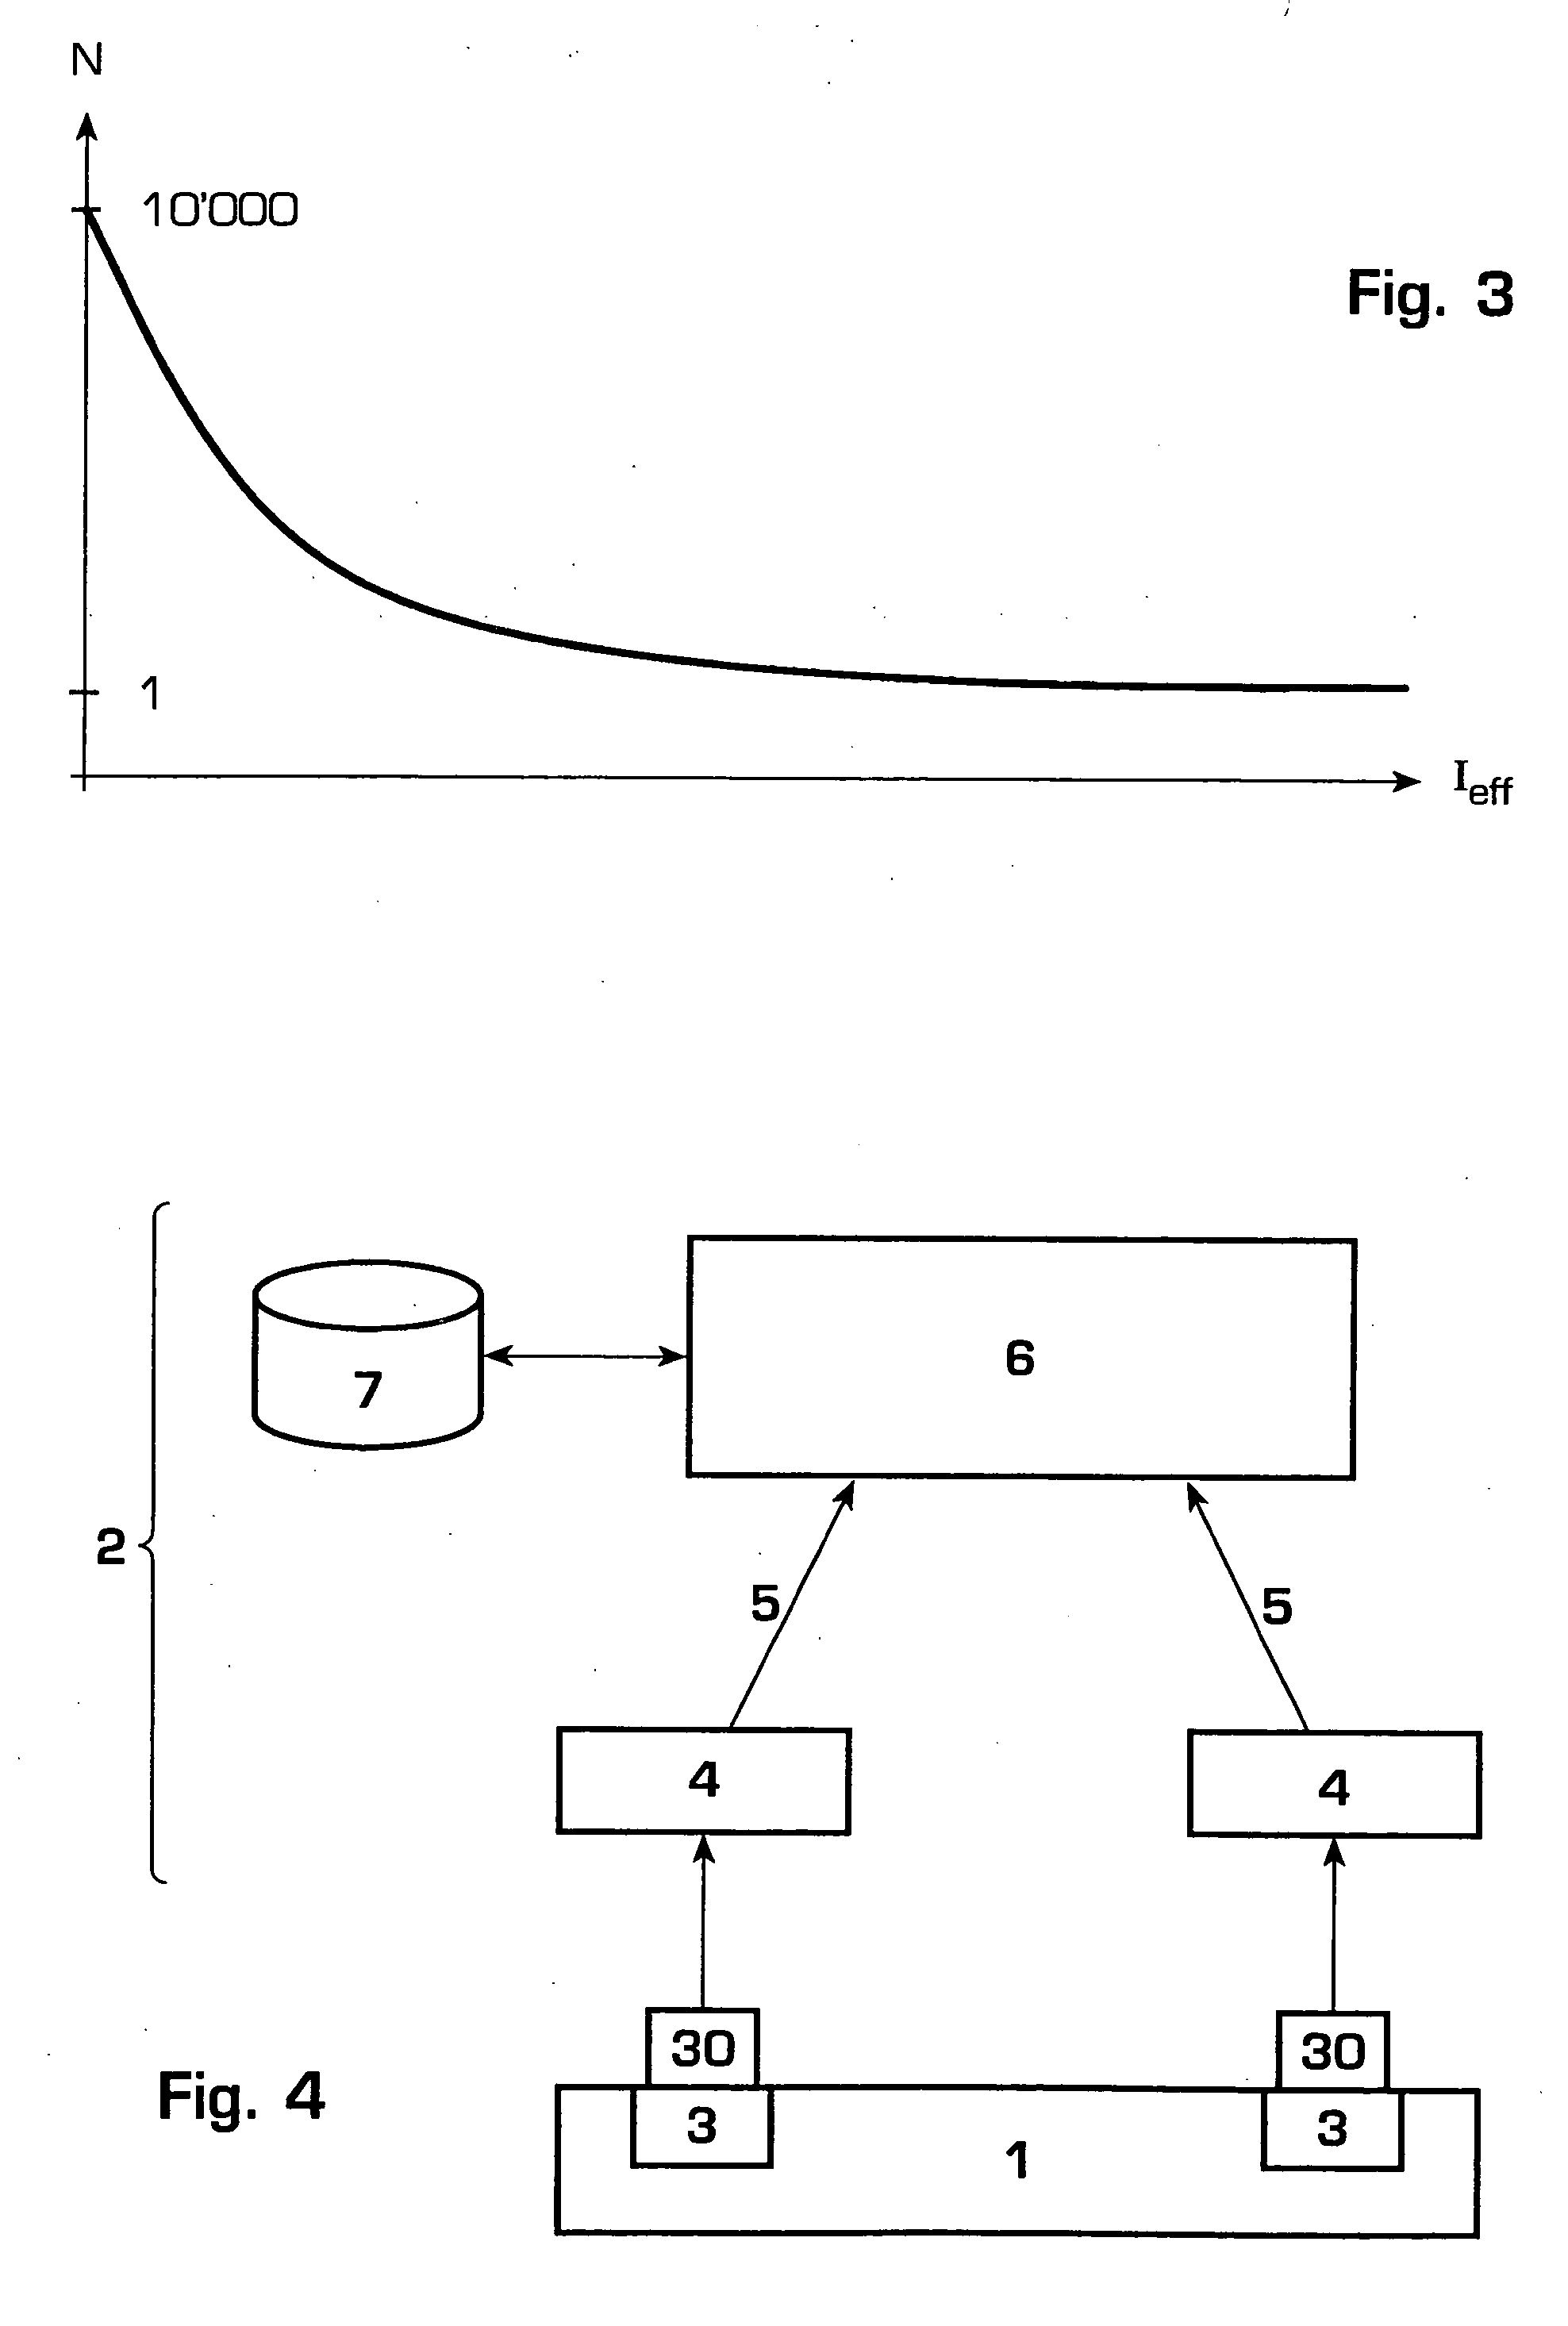 Method and device for monitoring switchgear in electrical switchgear assemblies